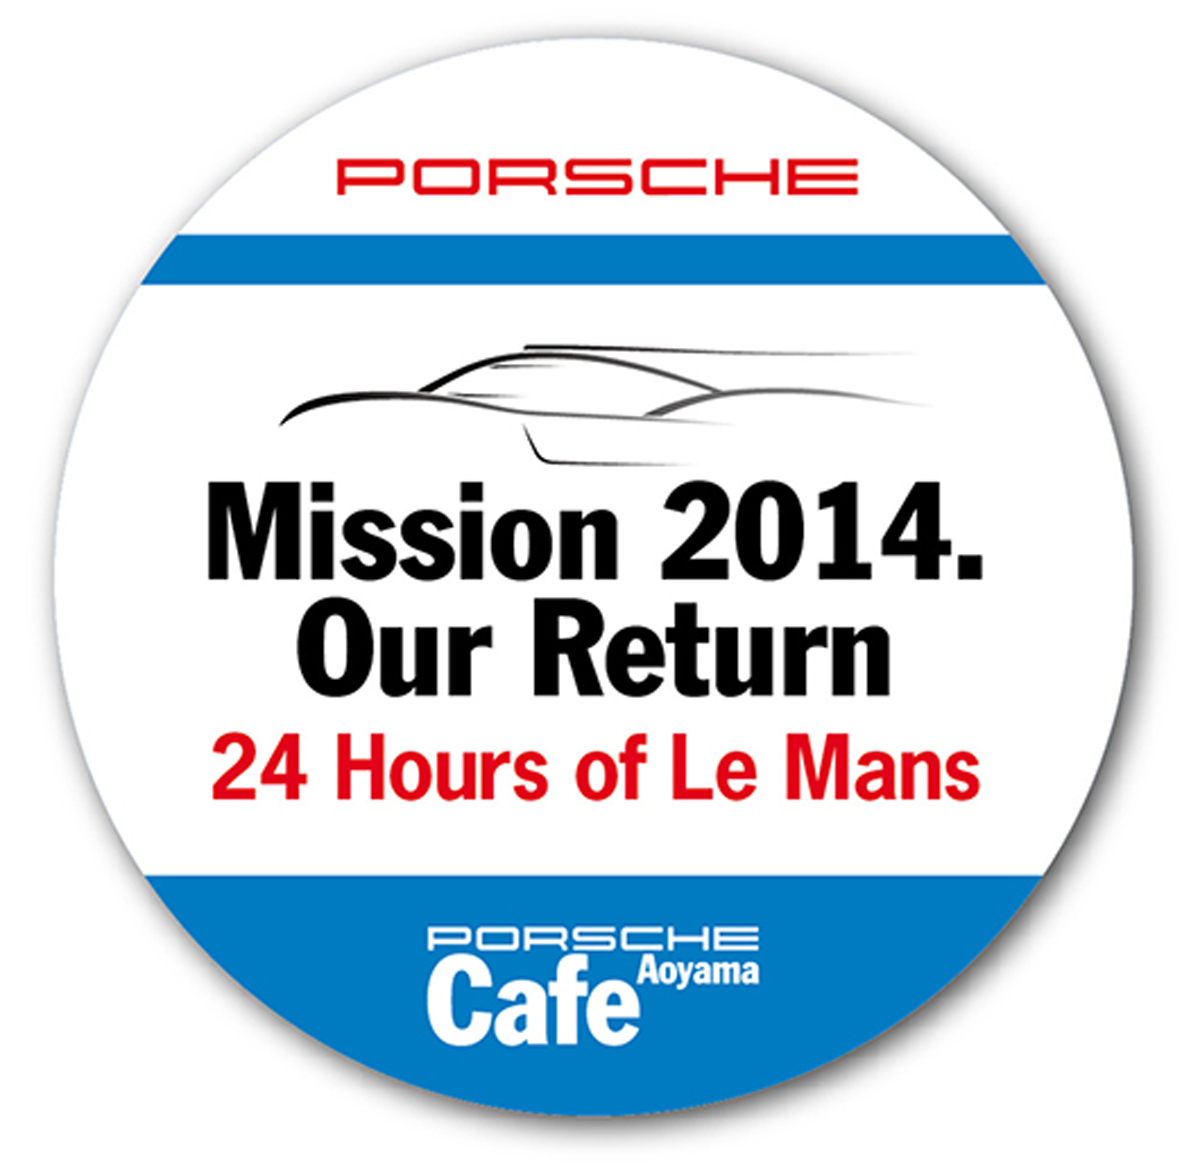 Porsche Cafe Aoyama　Mission 2014 - Our Return to Le Mans